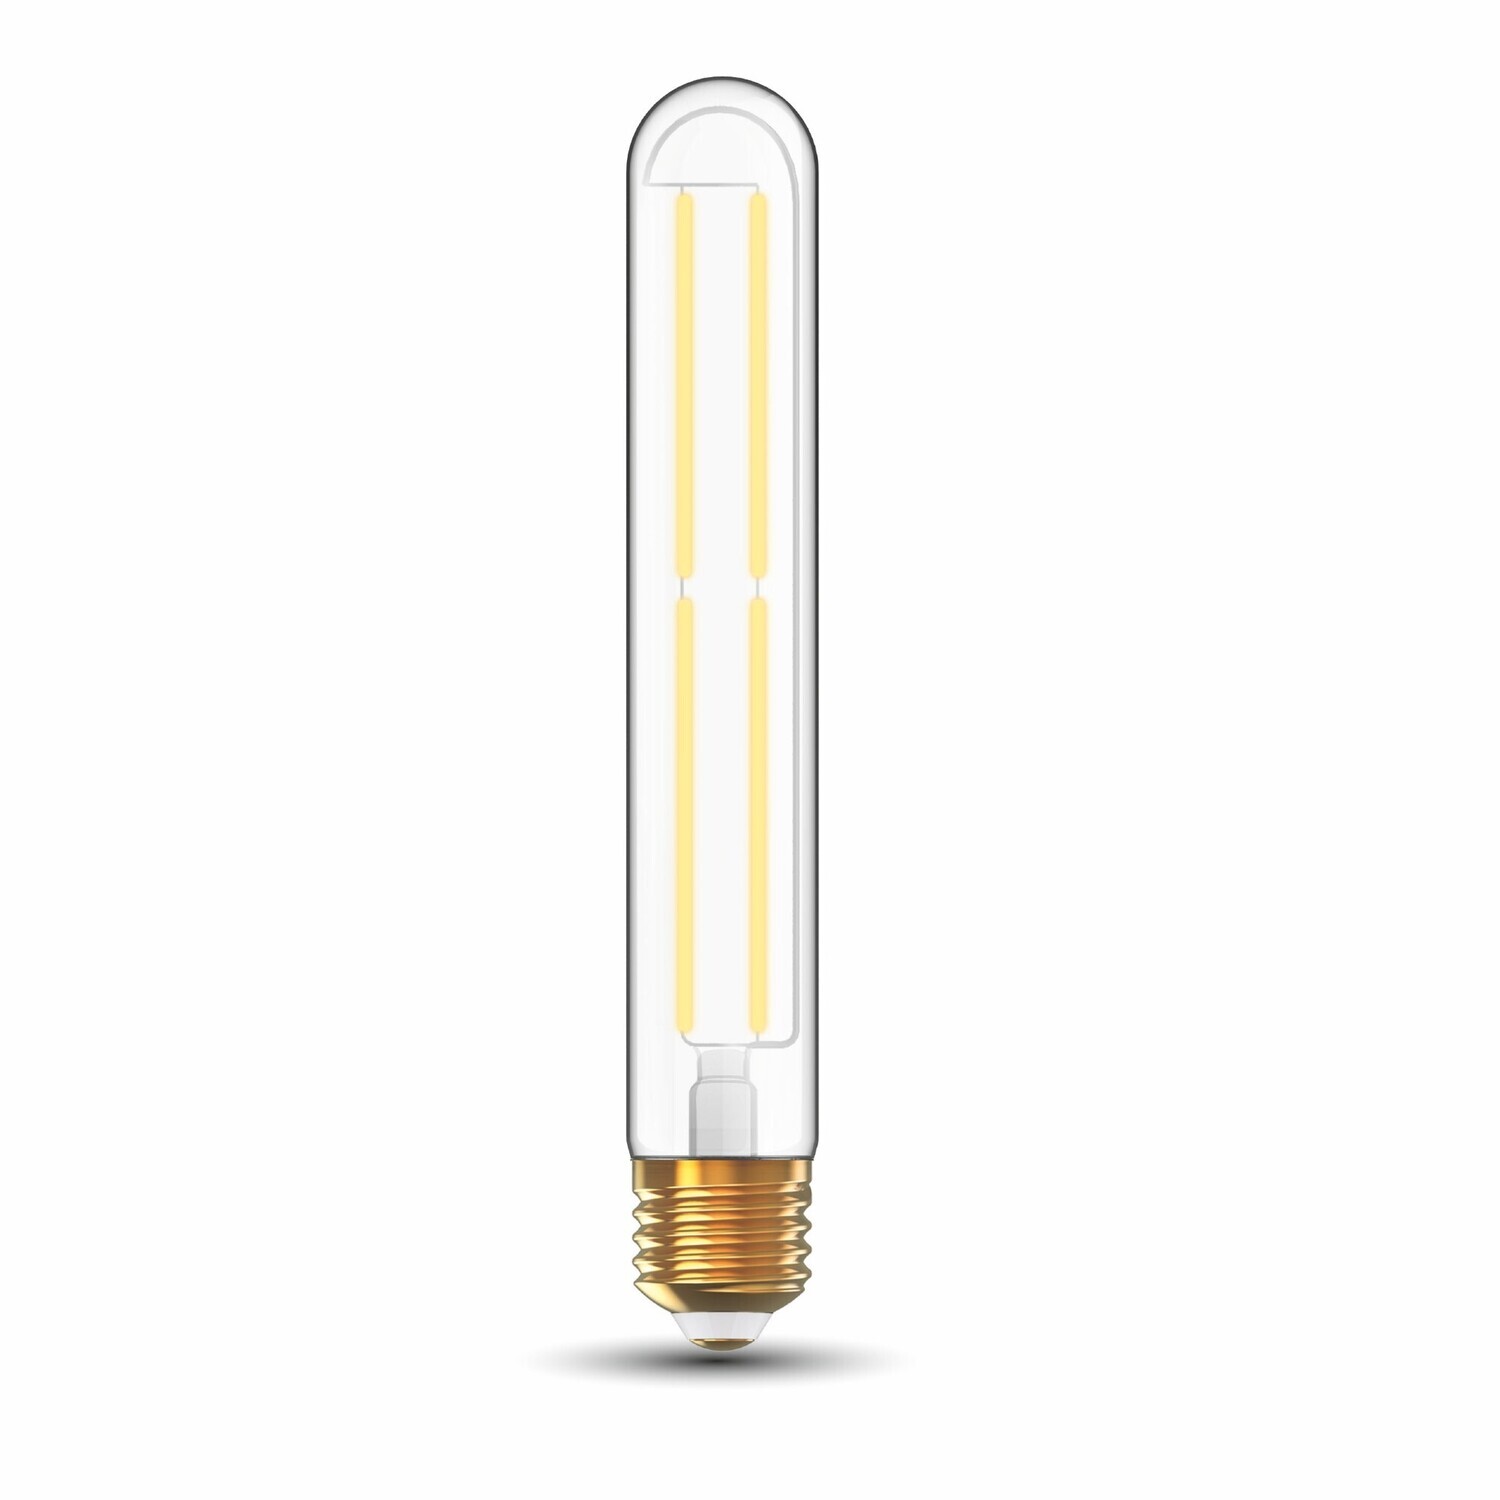 E27 LED filament T30 185mm Tubular Line 4W 4000K (natural white) 300lm clear DIMMABLE